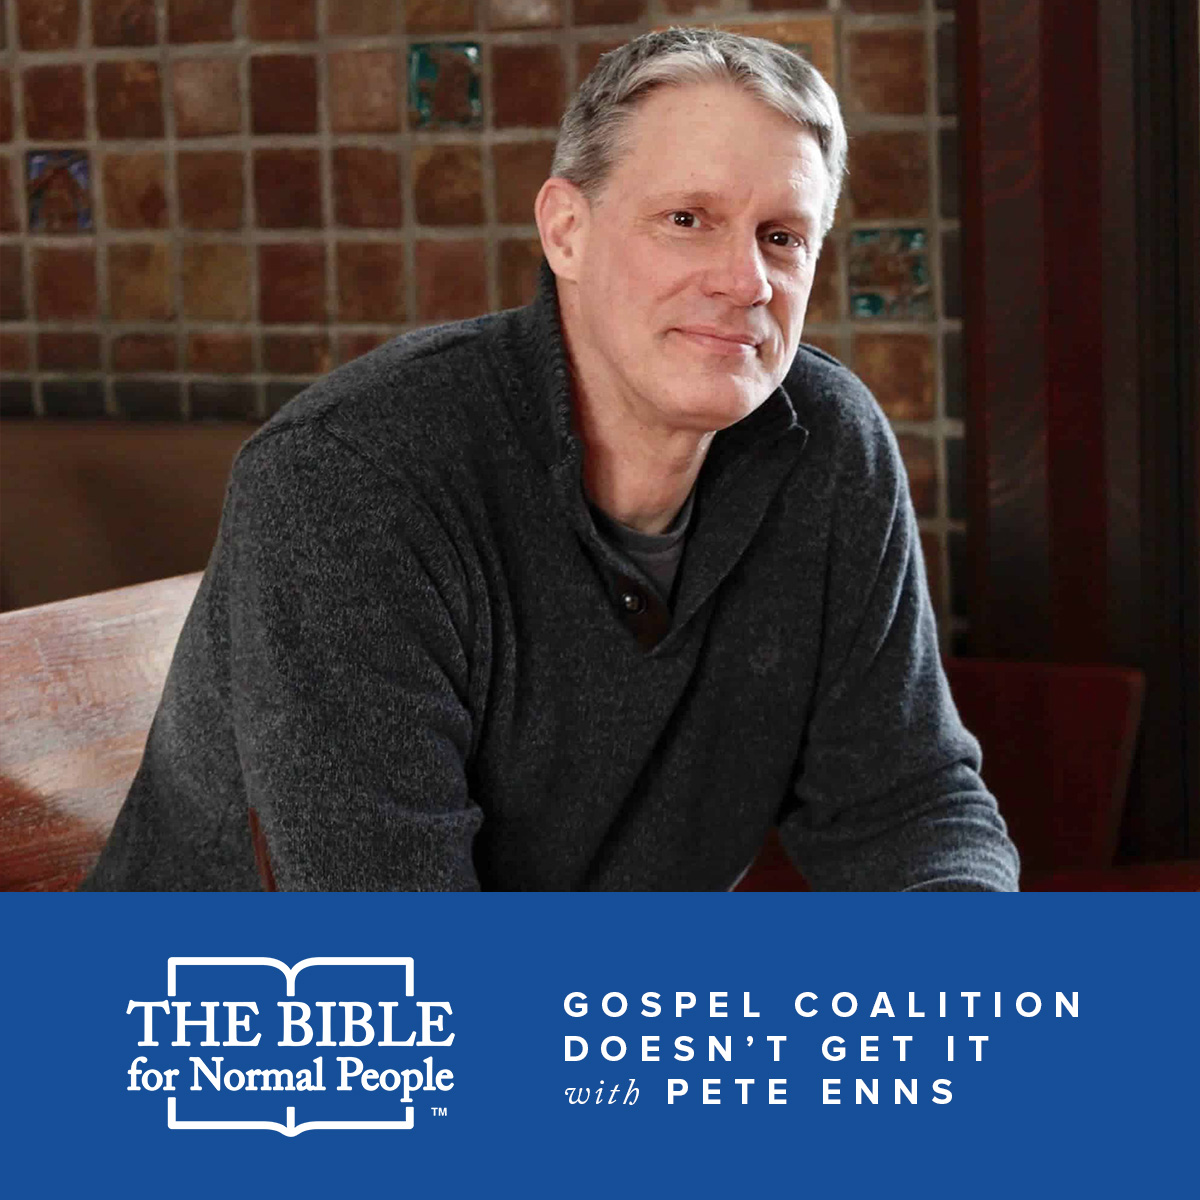 The Gospel Coalition Doesn’t Really Get Progressive Christianity and Atheism